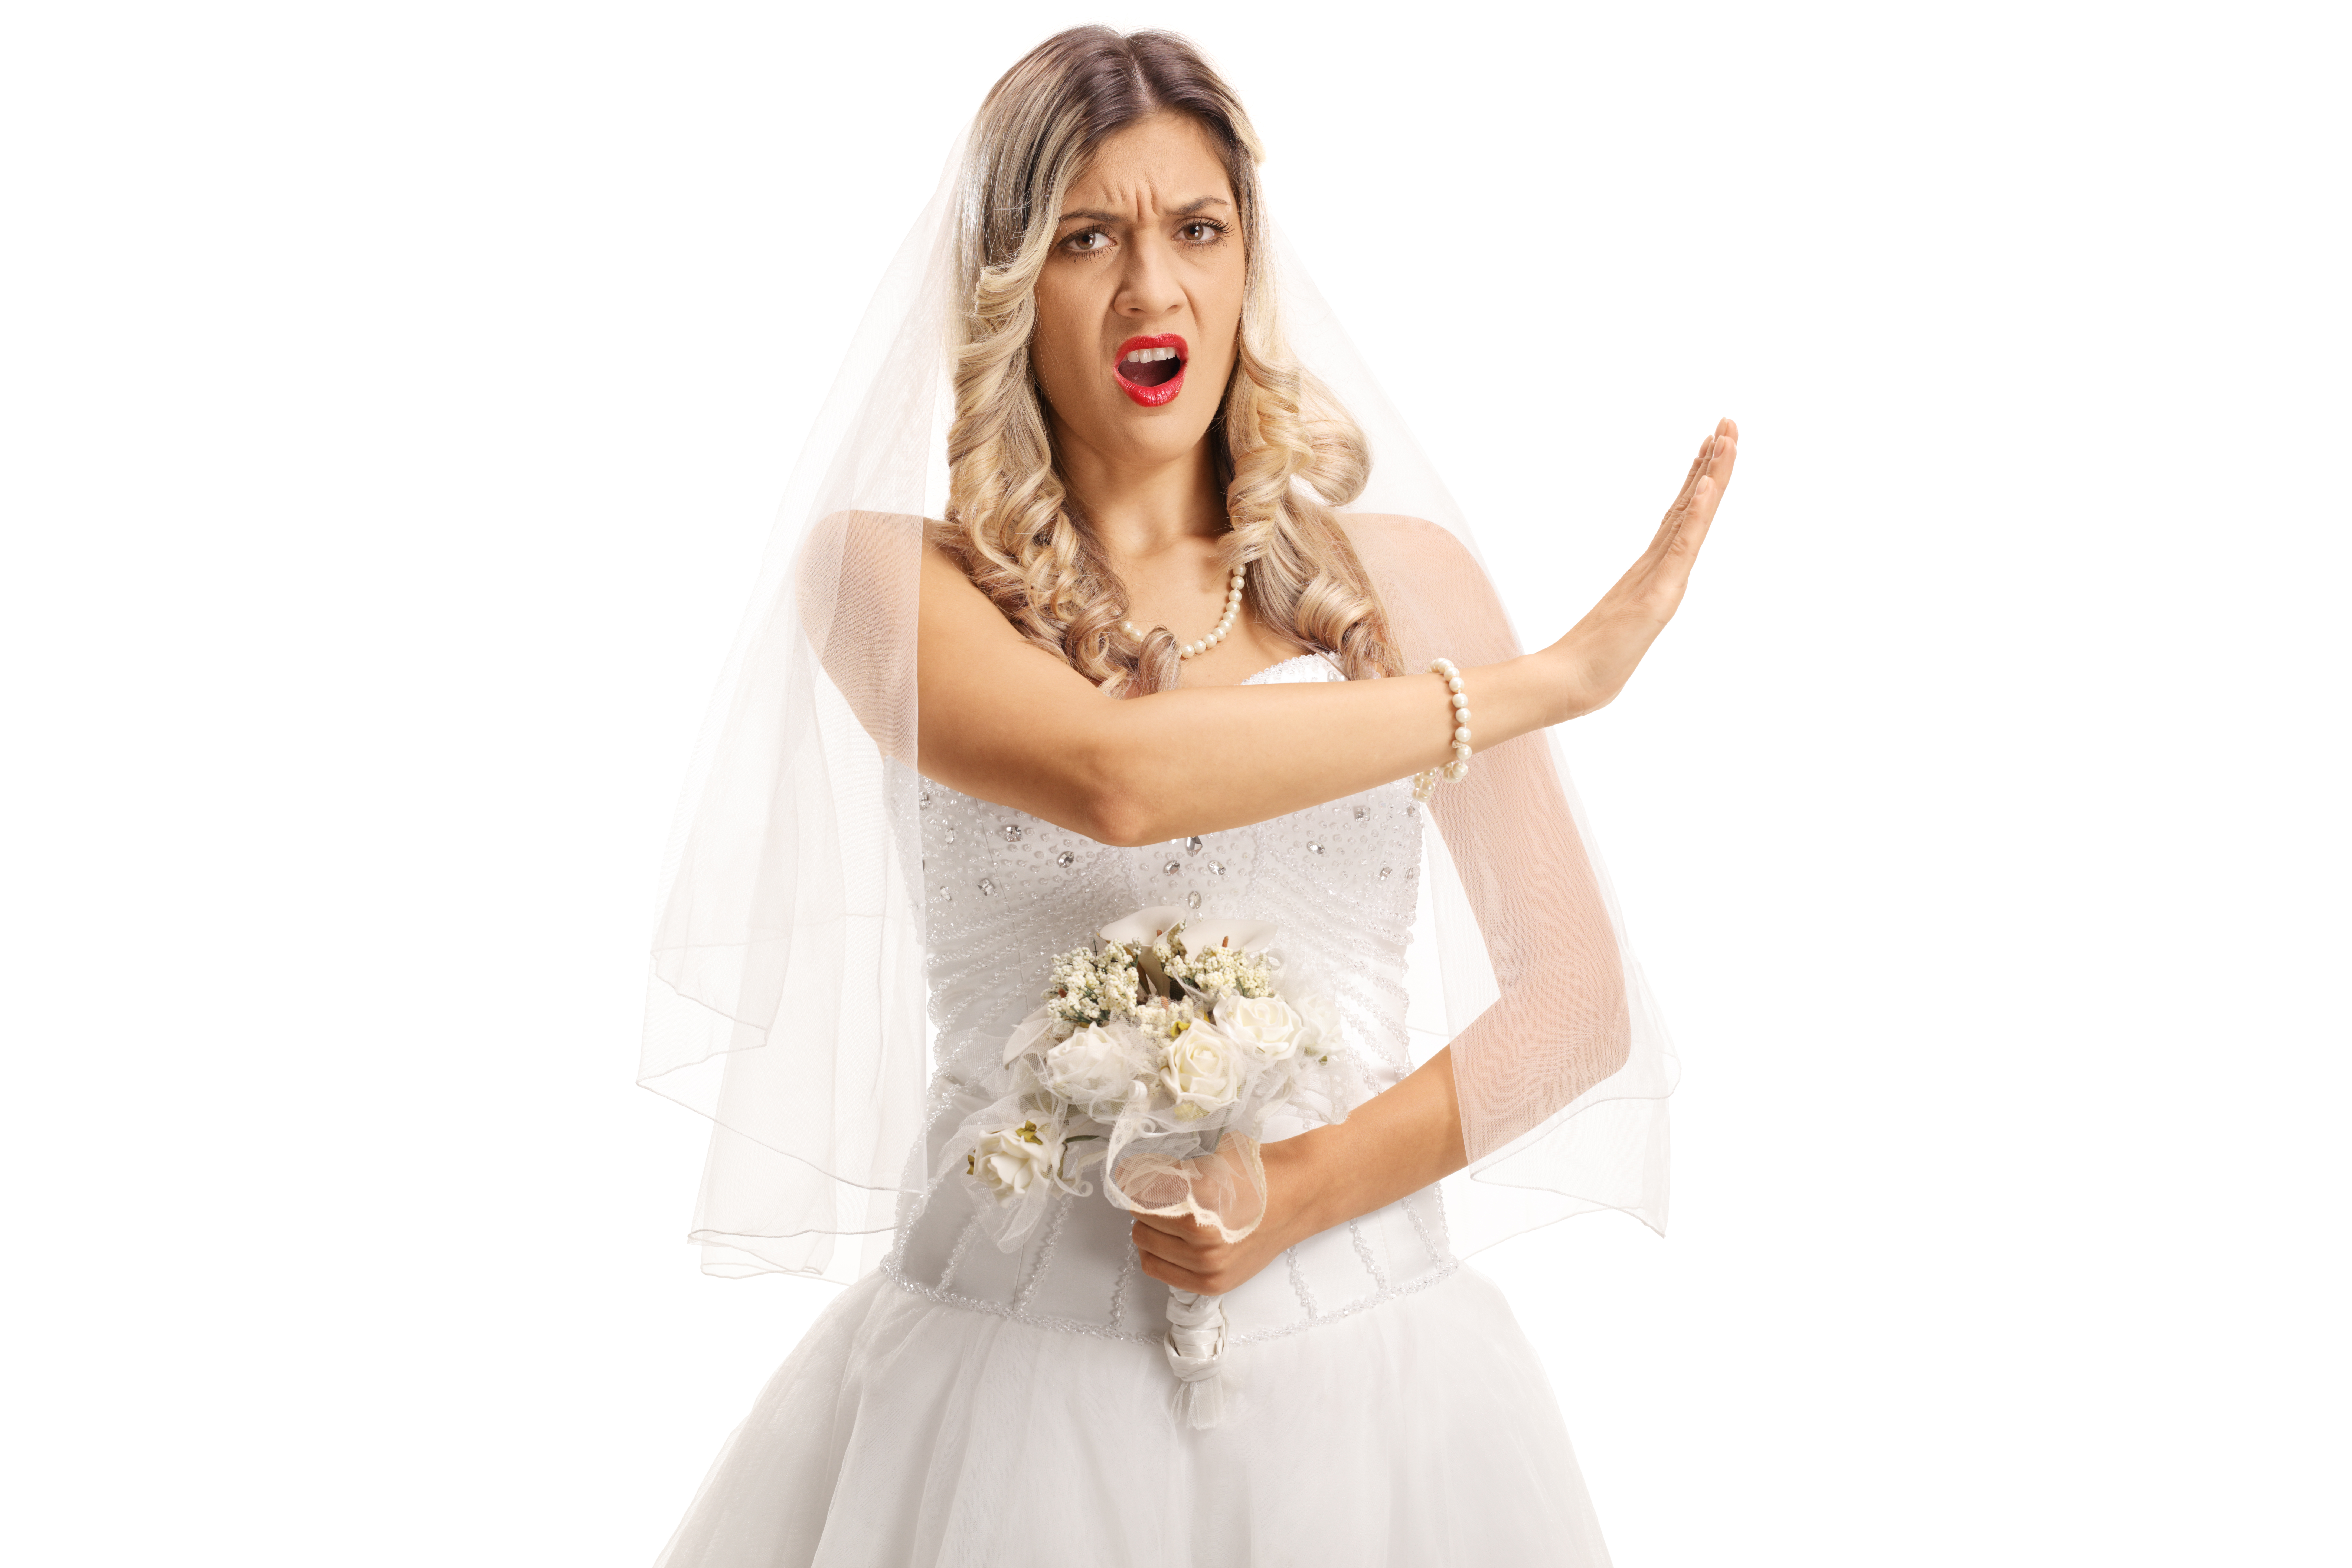 Angry bride | Source: Shutterstock